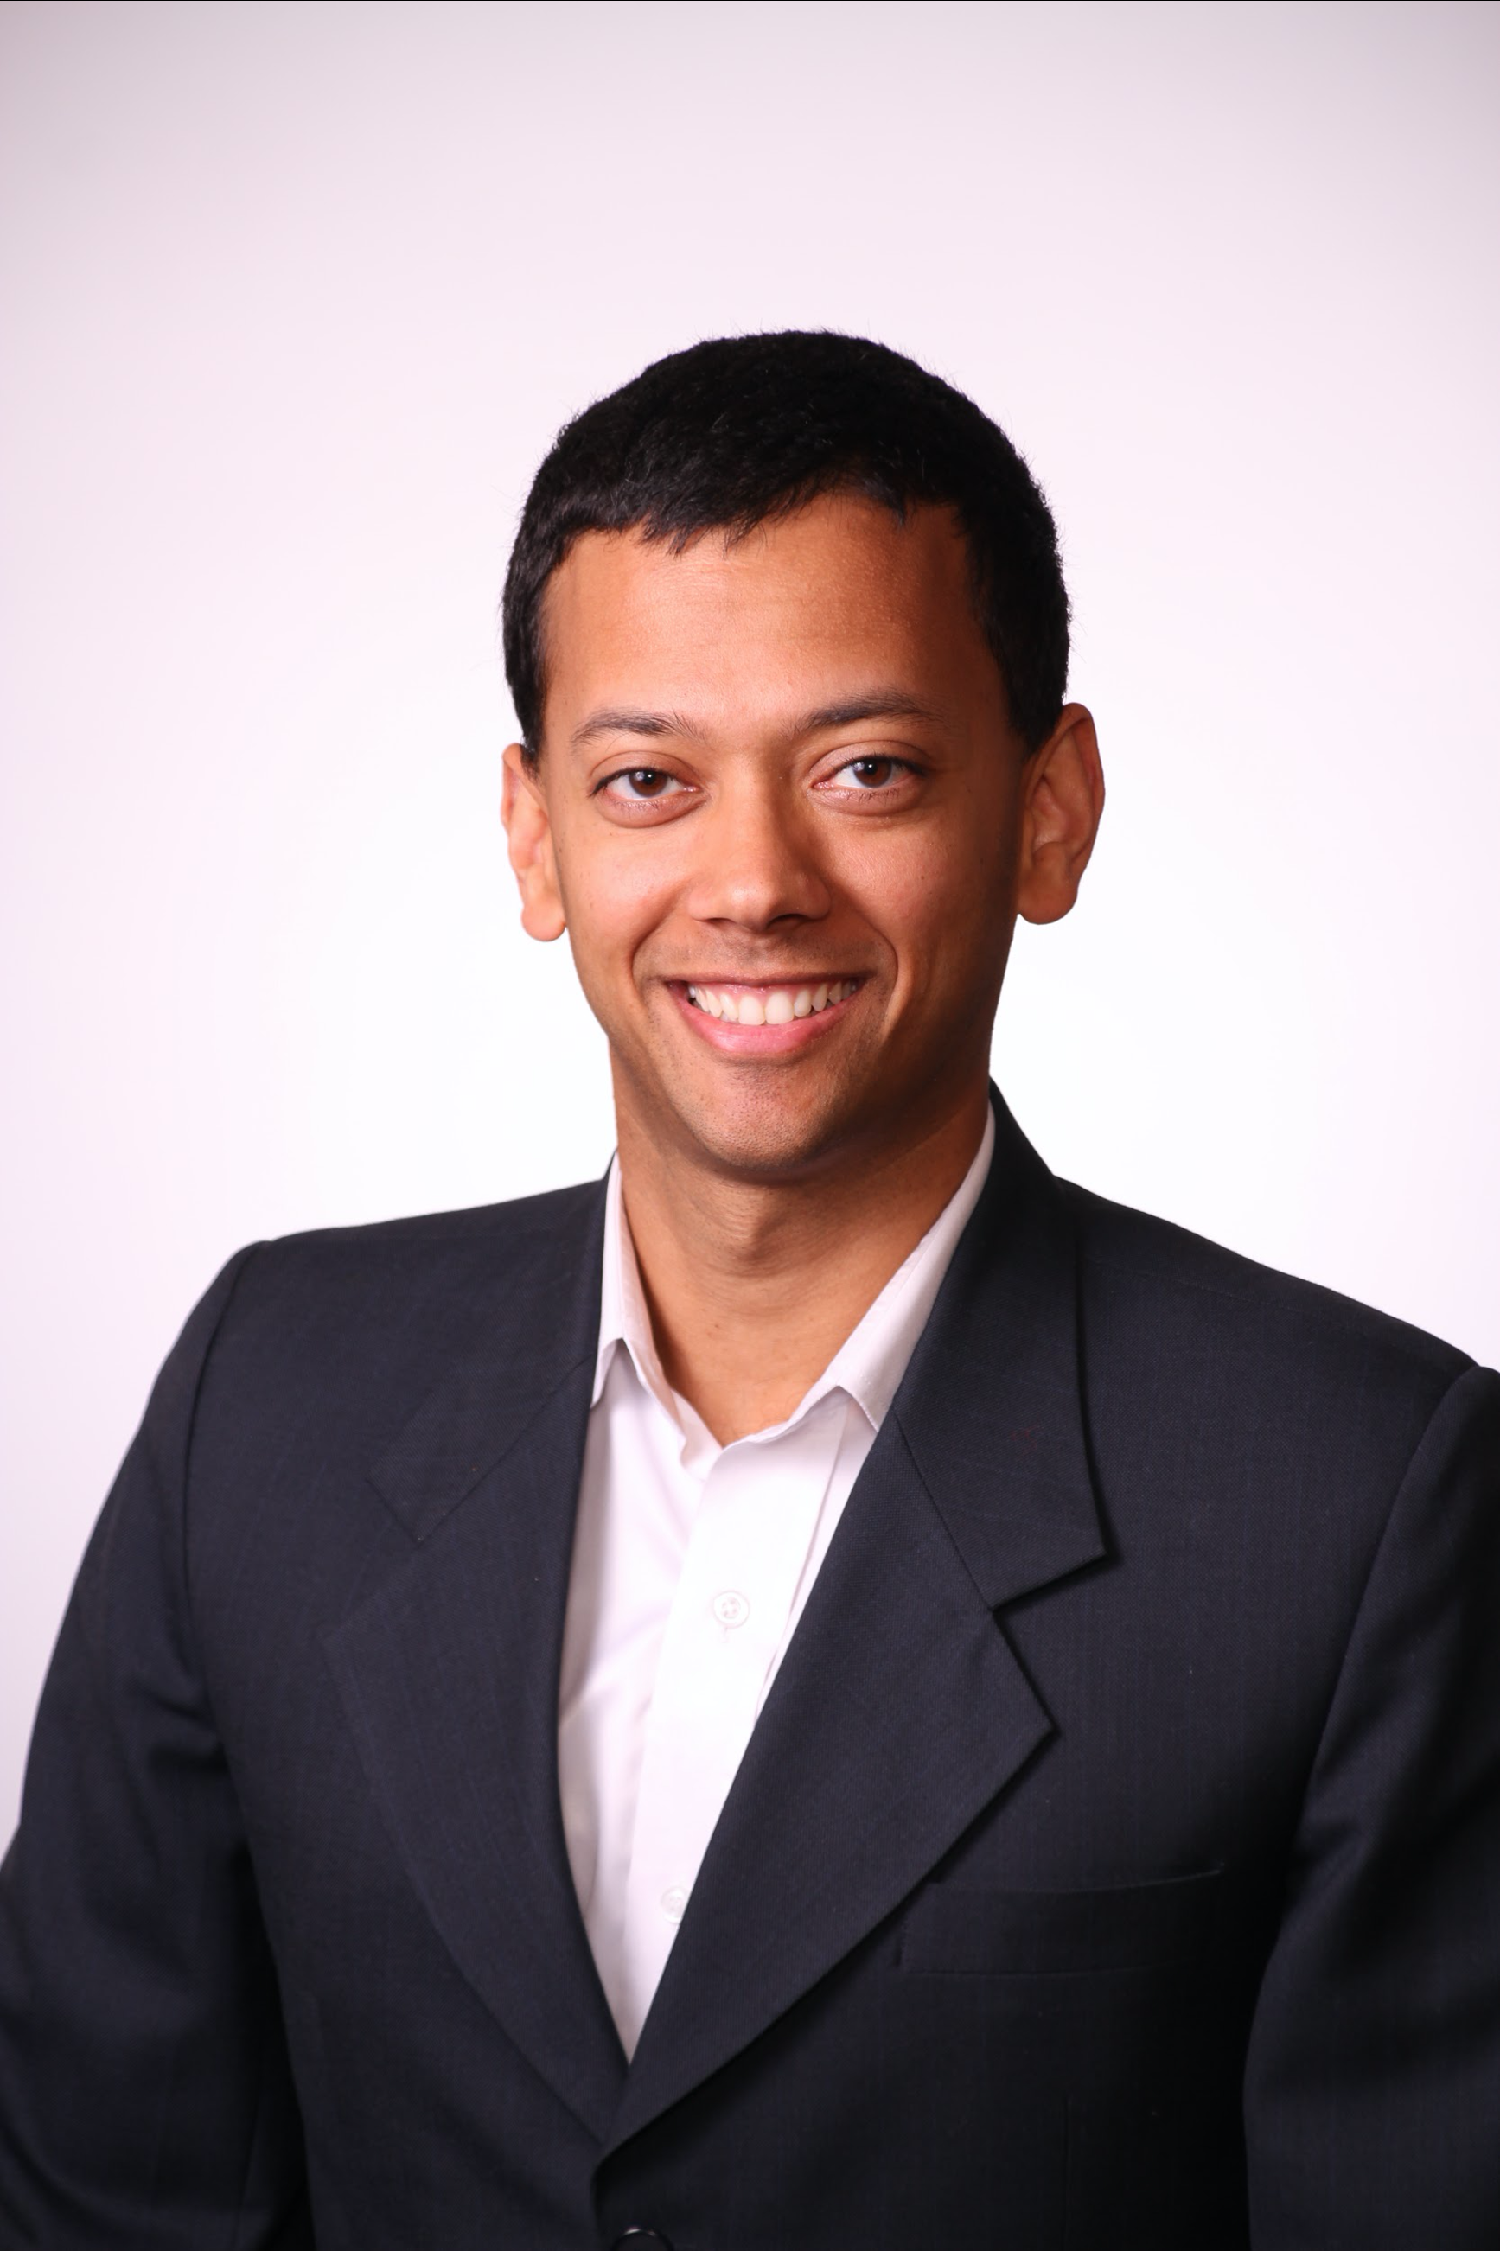 Hemant Sikaria, CEO & Co-Founder